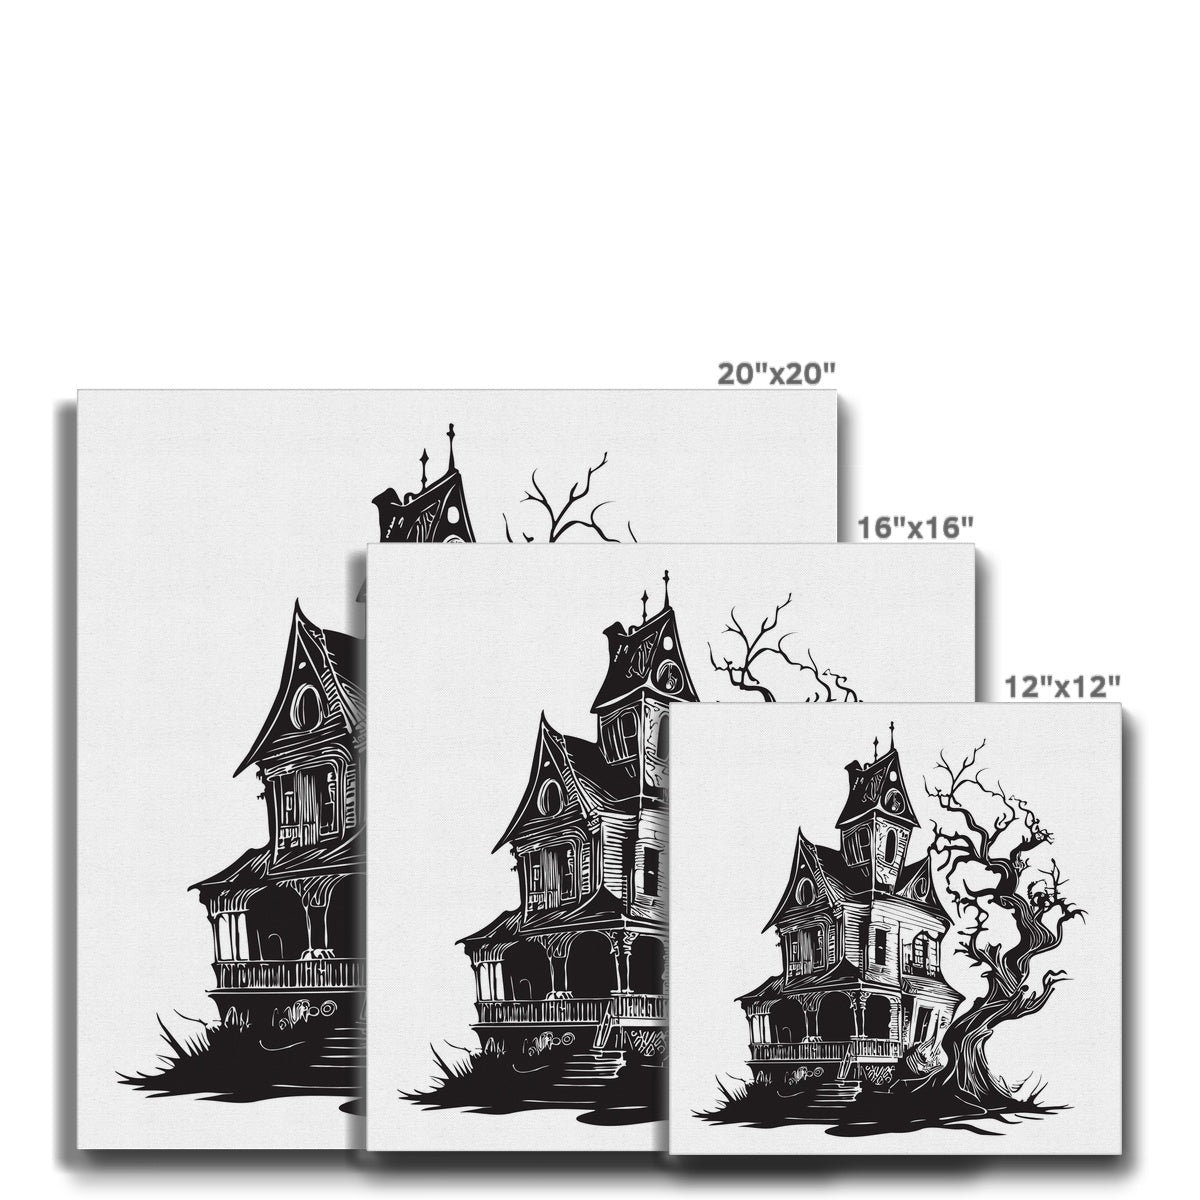 Haunted House Sketch Canvas